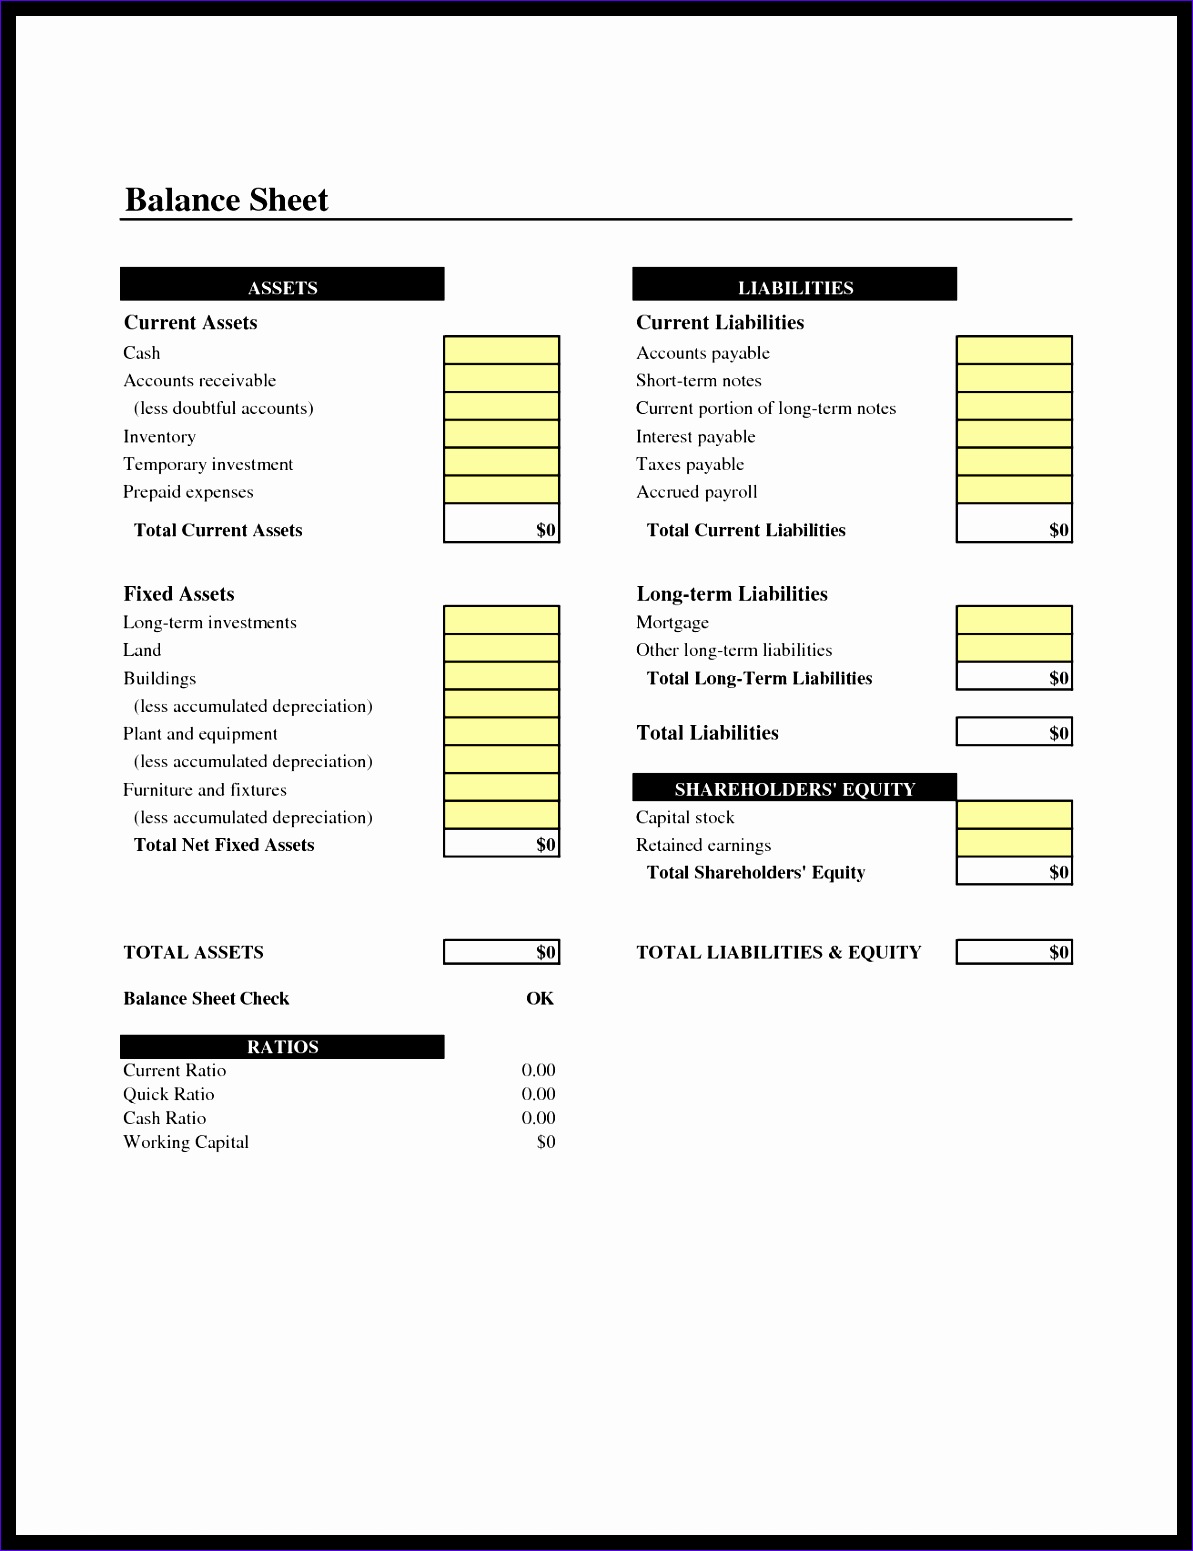 in e balance sheet template snapshot of your excel small business and agenda for meeting blank invoice example advertisement flyer booklet award word attendance book receipt army